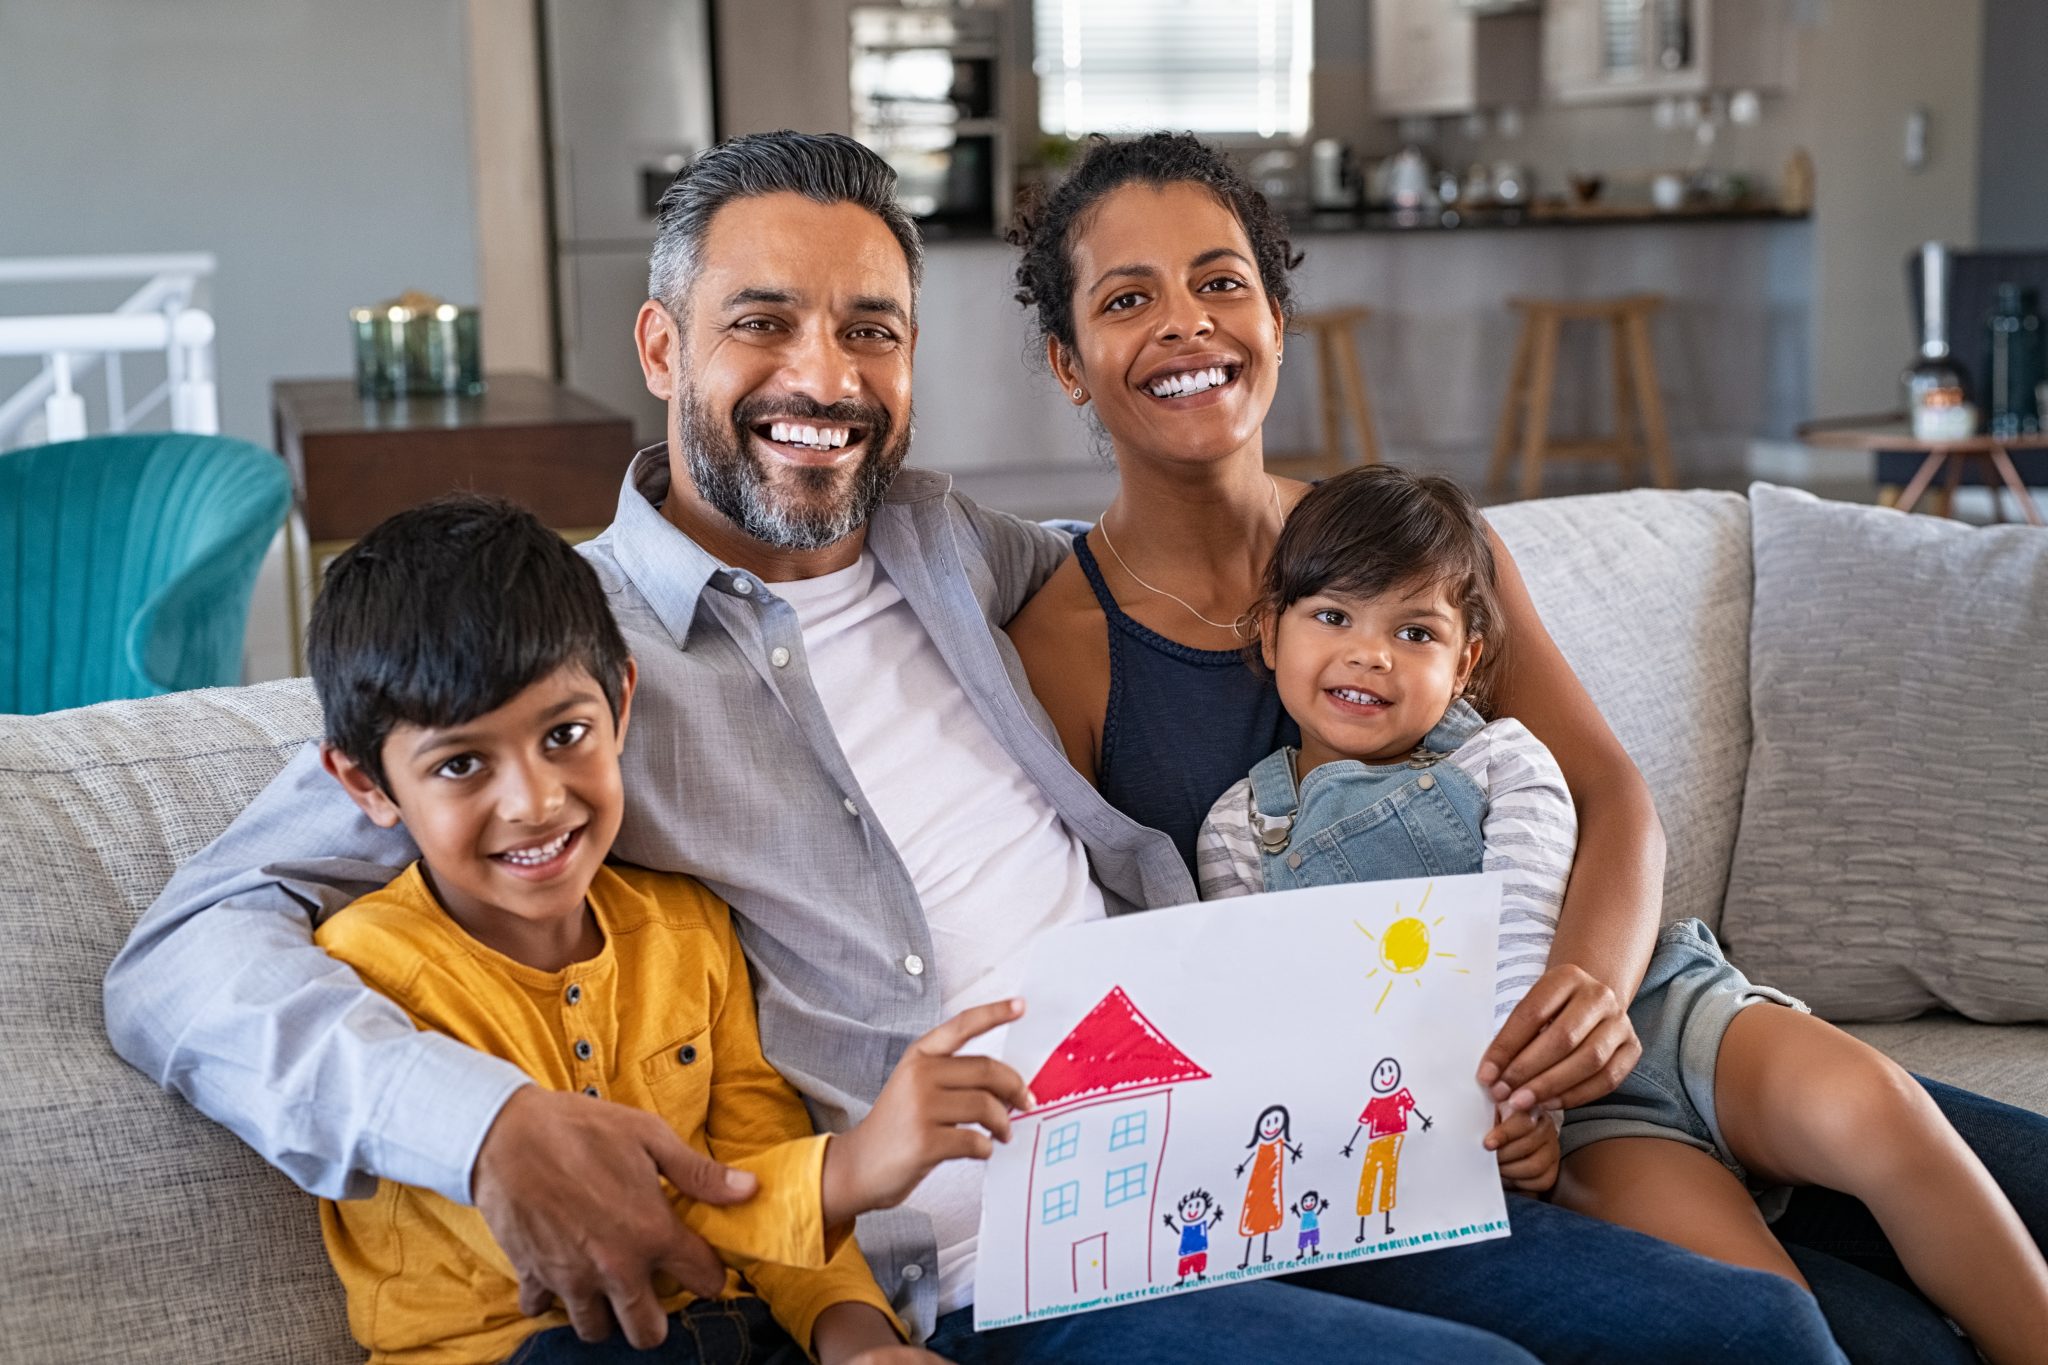 A Middle Eastern family sitting on a couch with a child's drawing showed.